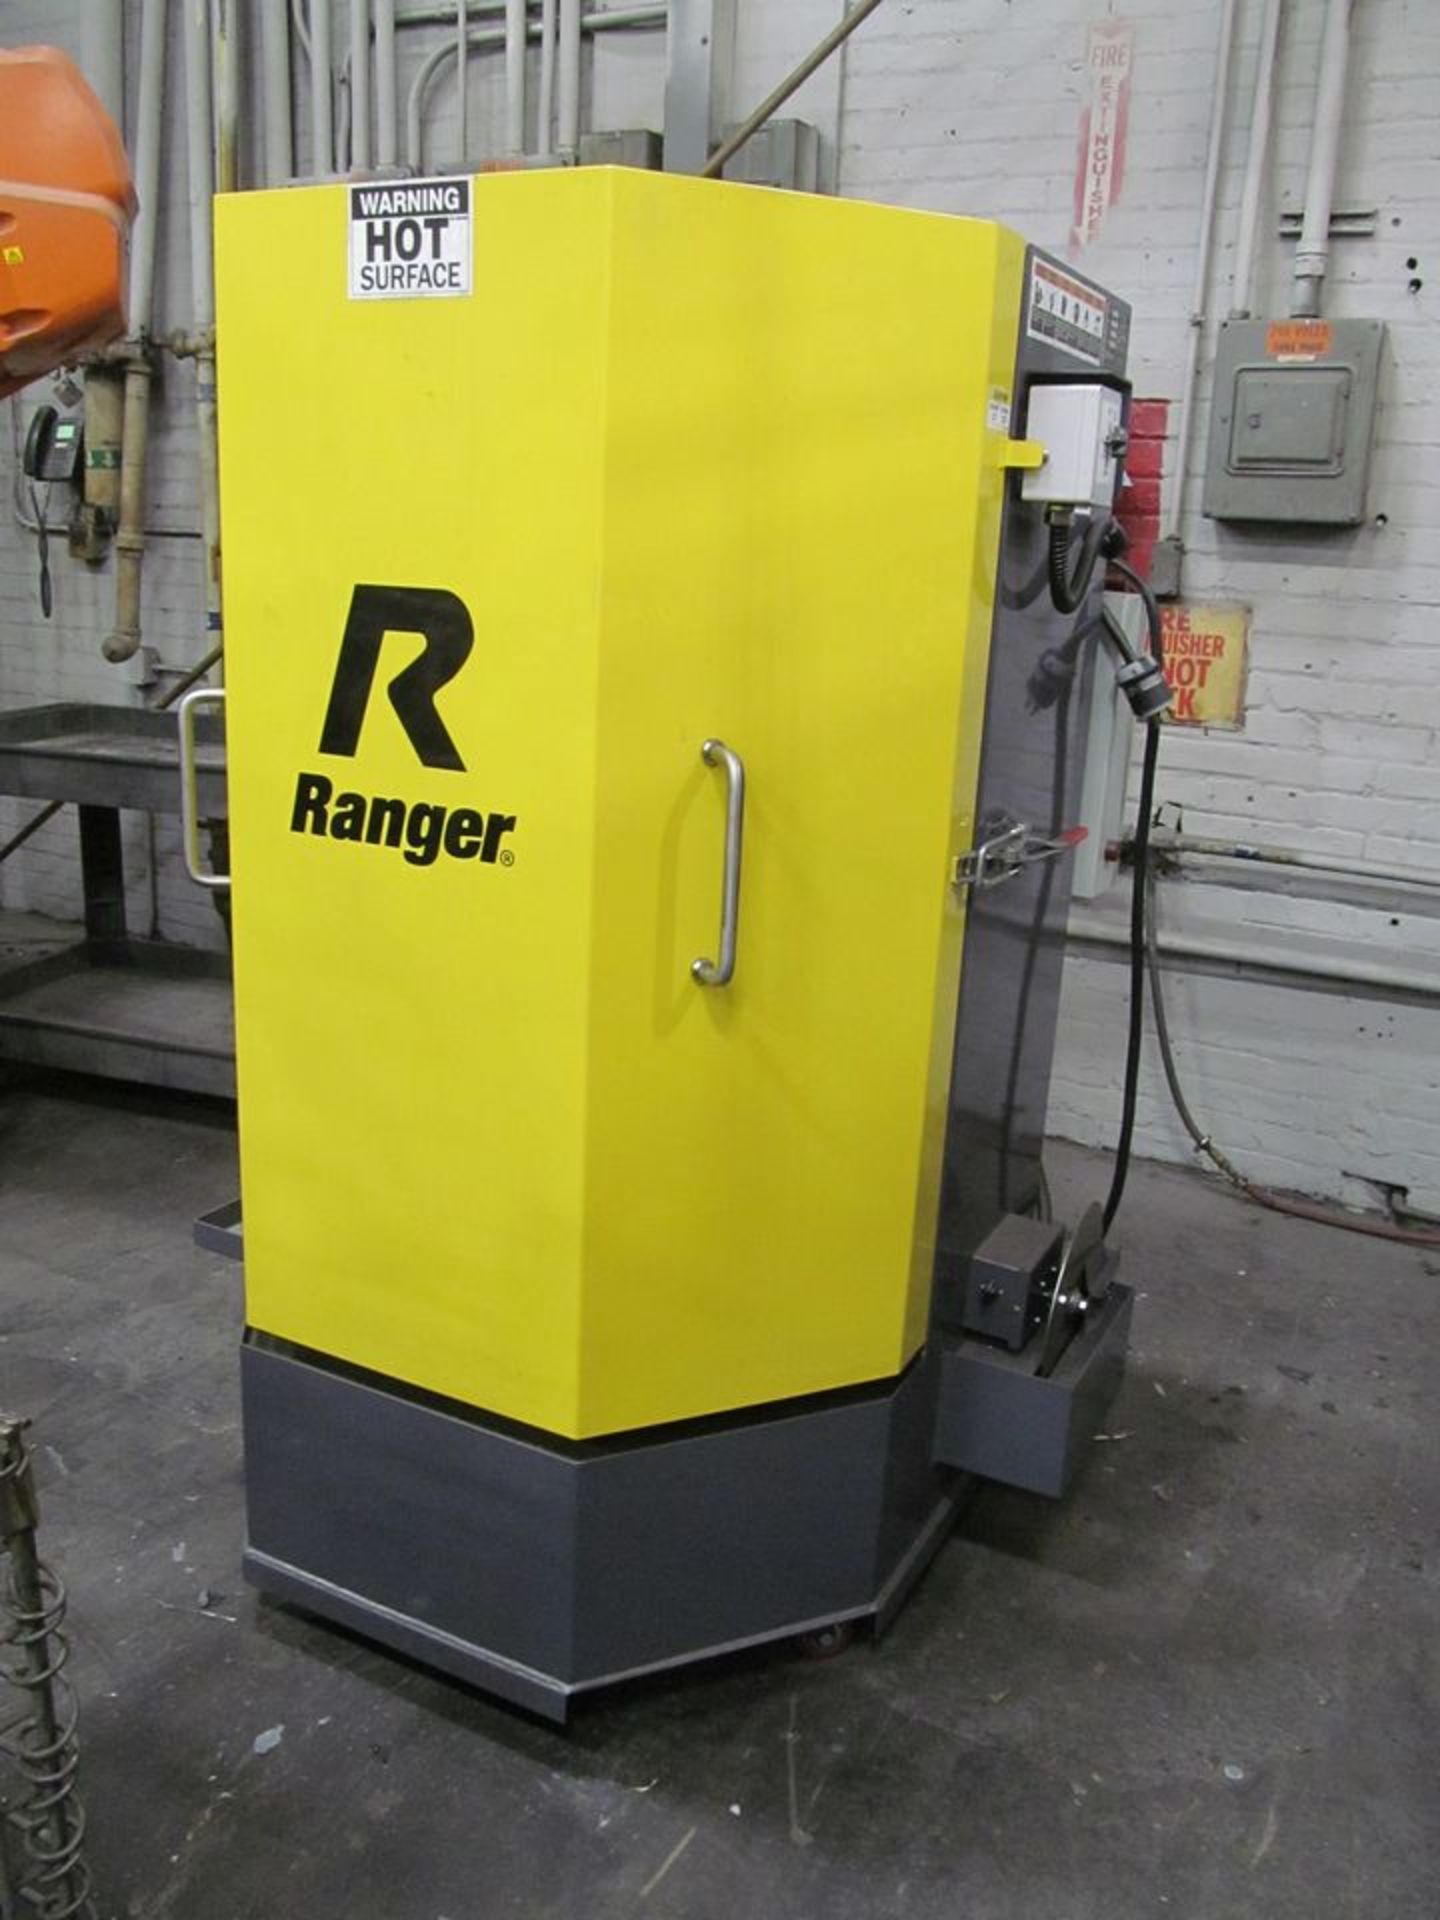 Ranger Model RS-500-D-601 Spray Wash Cabinet, S/N: 19551-001-040 (2019); Rated at 500 lb. Max.